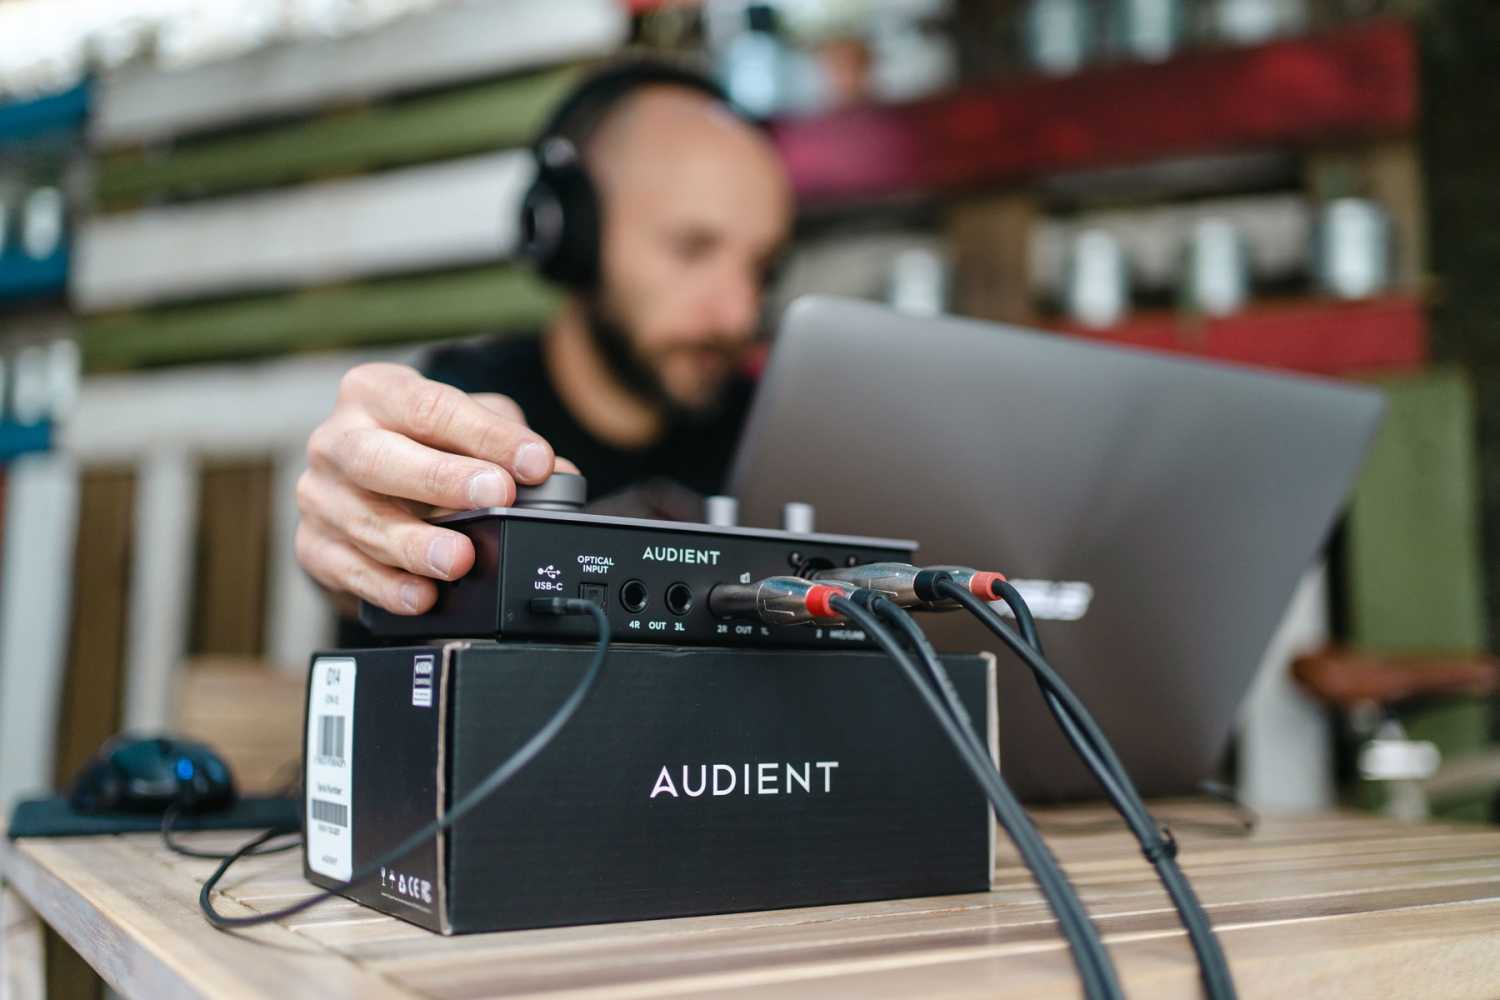 João Figueiredo looks after all things audio